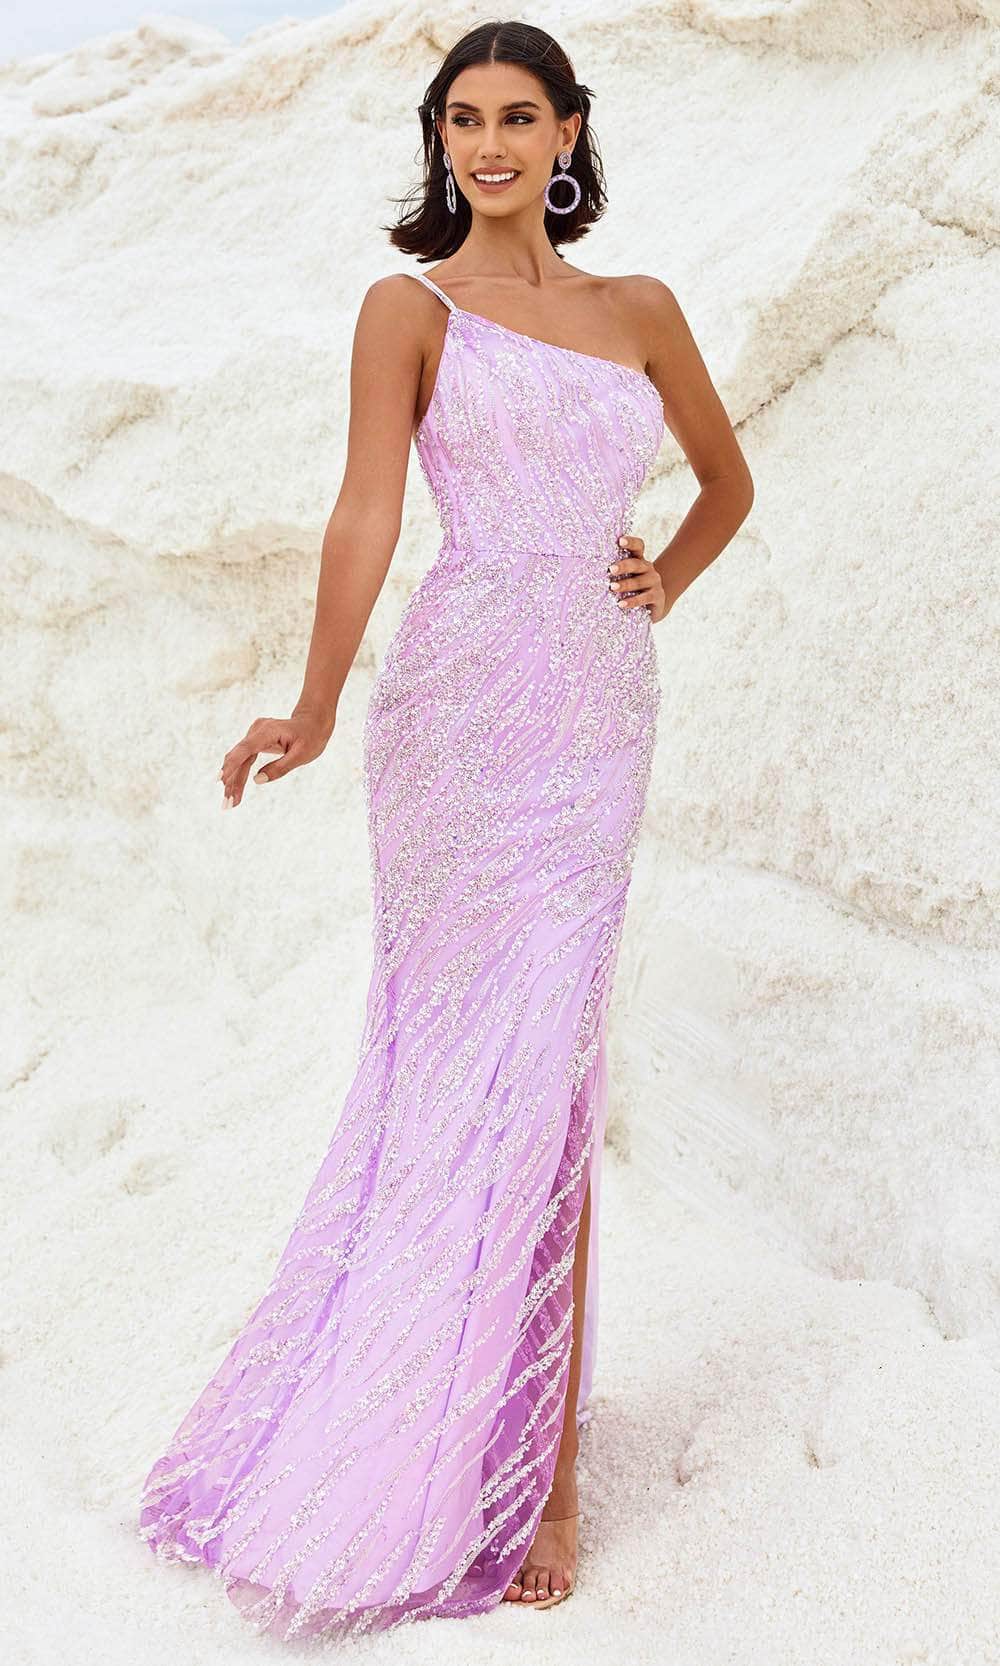 Blush by Alexia Designs 12121 - Asymmetric Sequin Prom Gown with Slit
